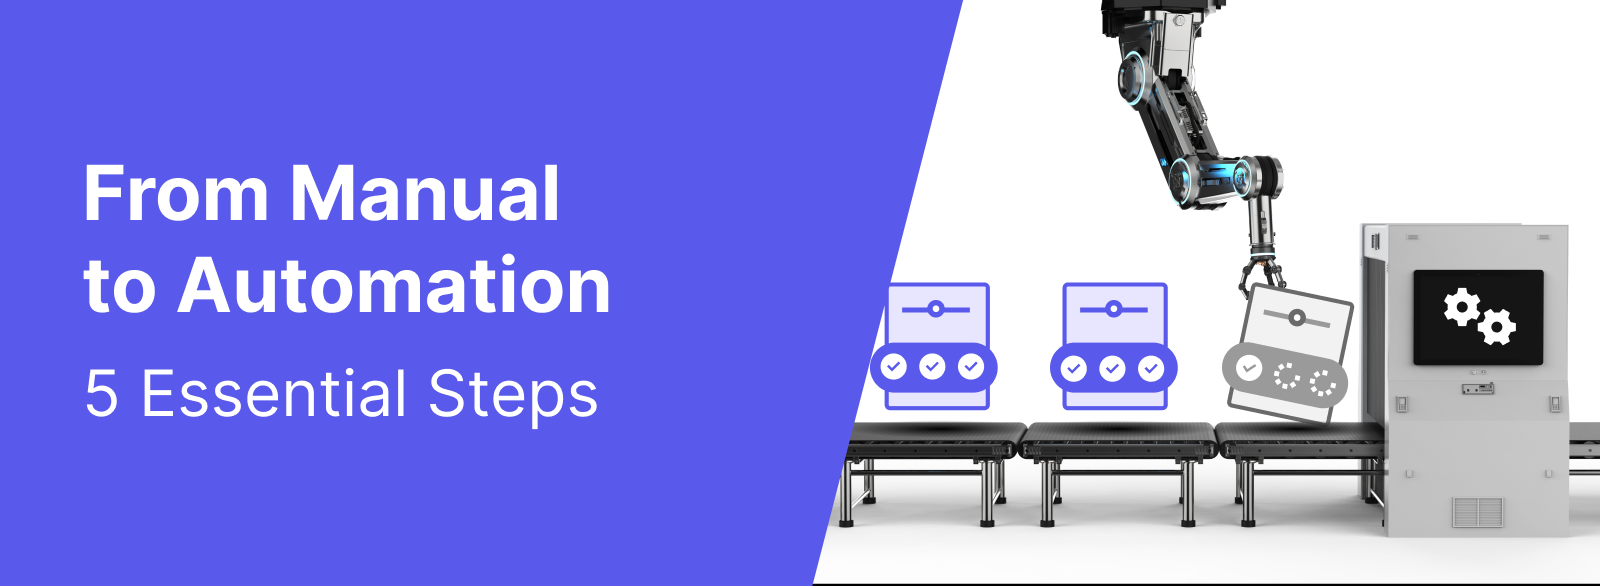  Shifting From Manual to Automation Testing: 5 Essential Steps | Katalon